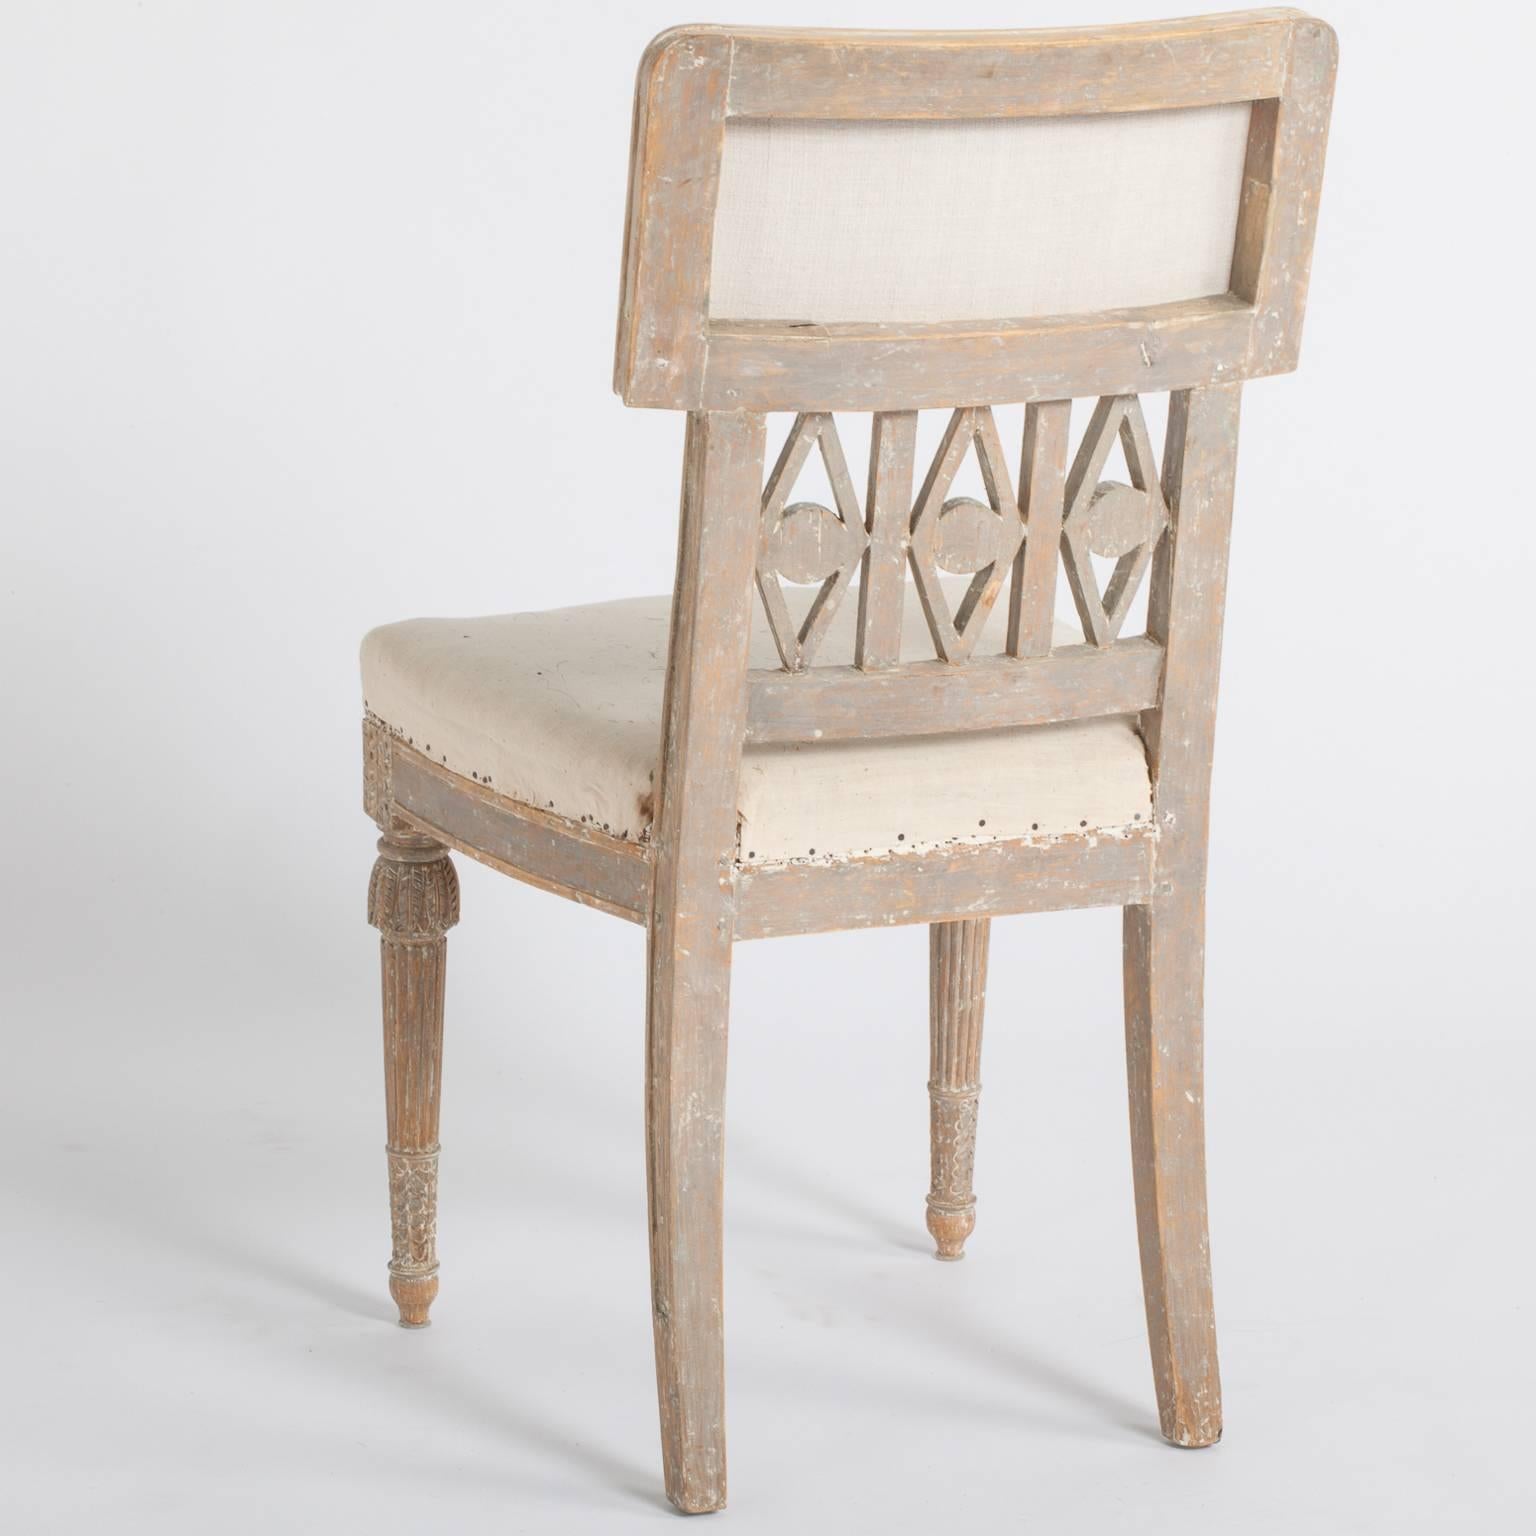 Carved Eight Signed Swedish Gustavian Period Chairs, Lindome, circa 1780